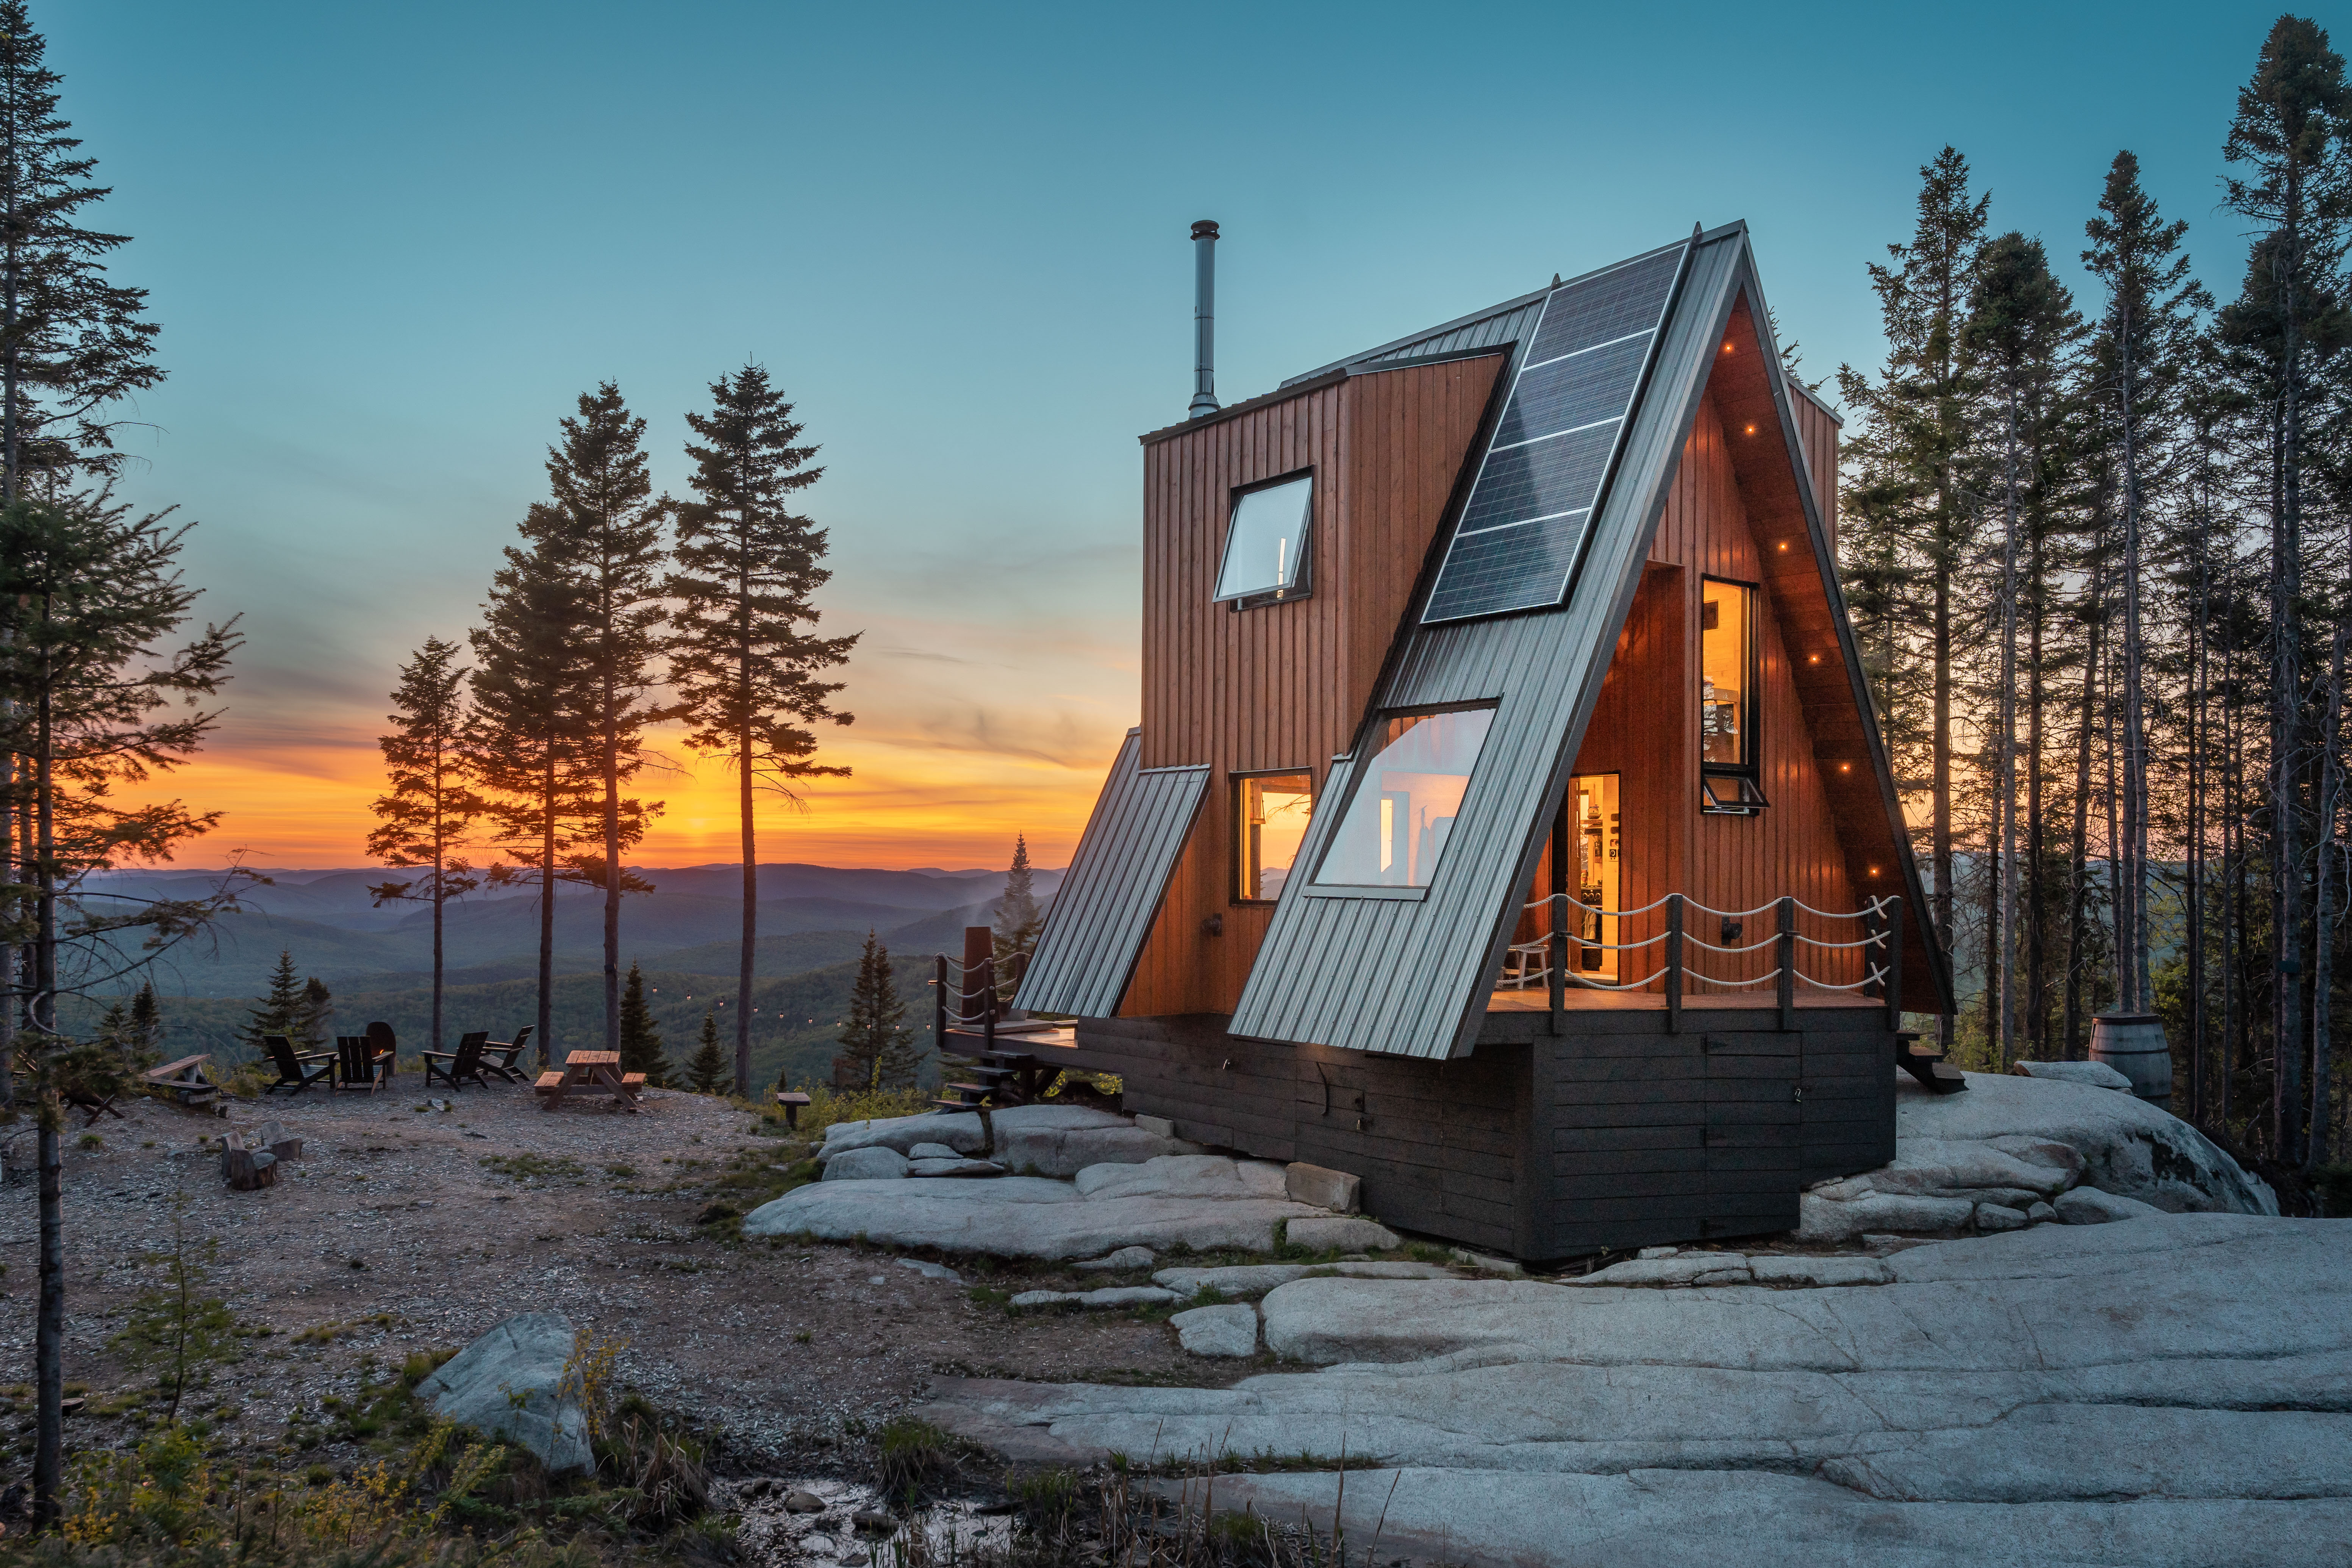 Elevated A-frame cabin lit from the inside atop a mountain overlook at sunset.